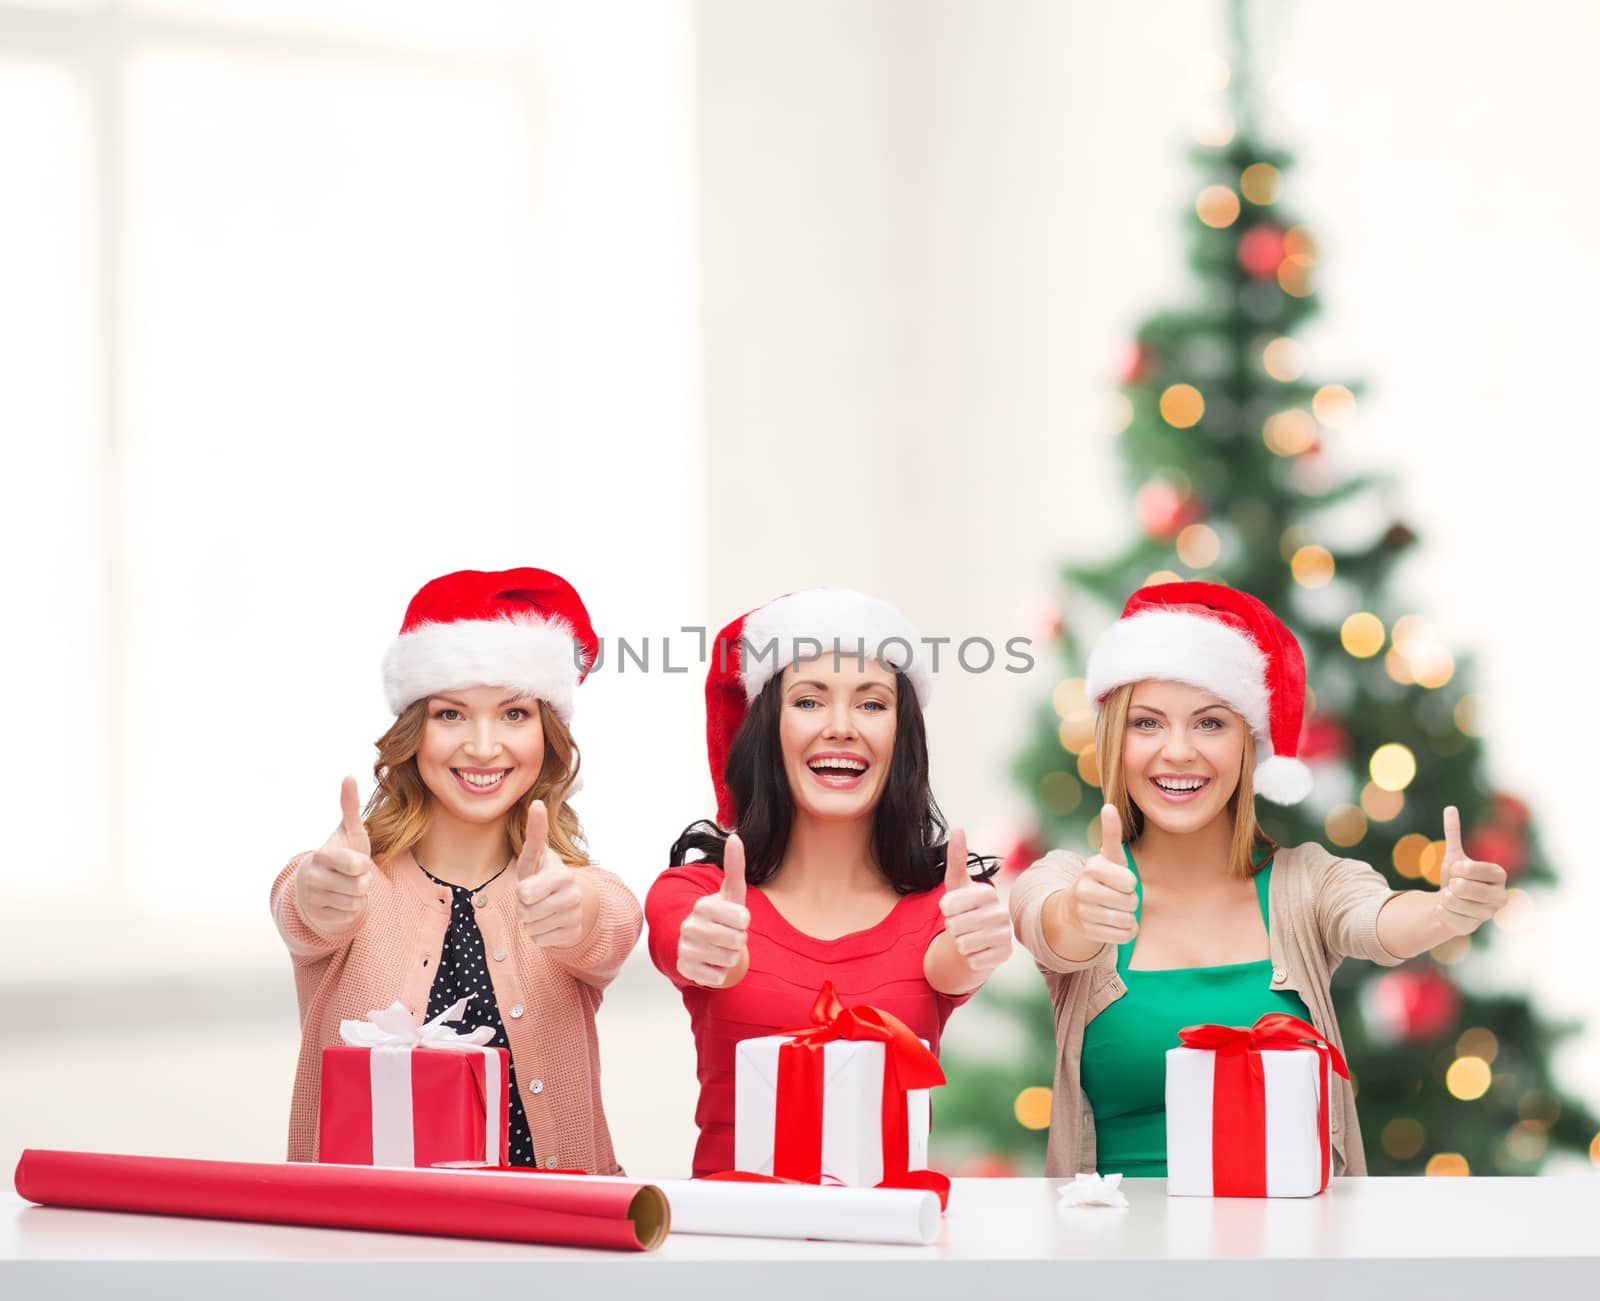 smiling women in santa helper hats with gift boxes by dolgachov